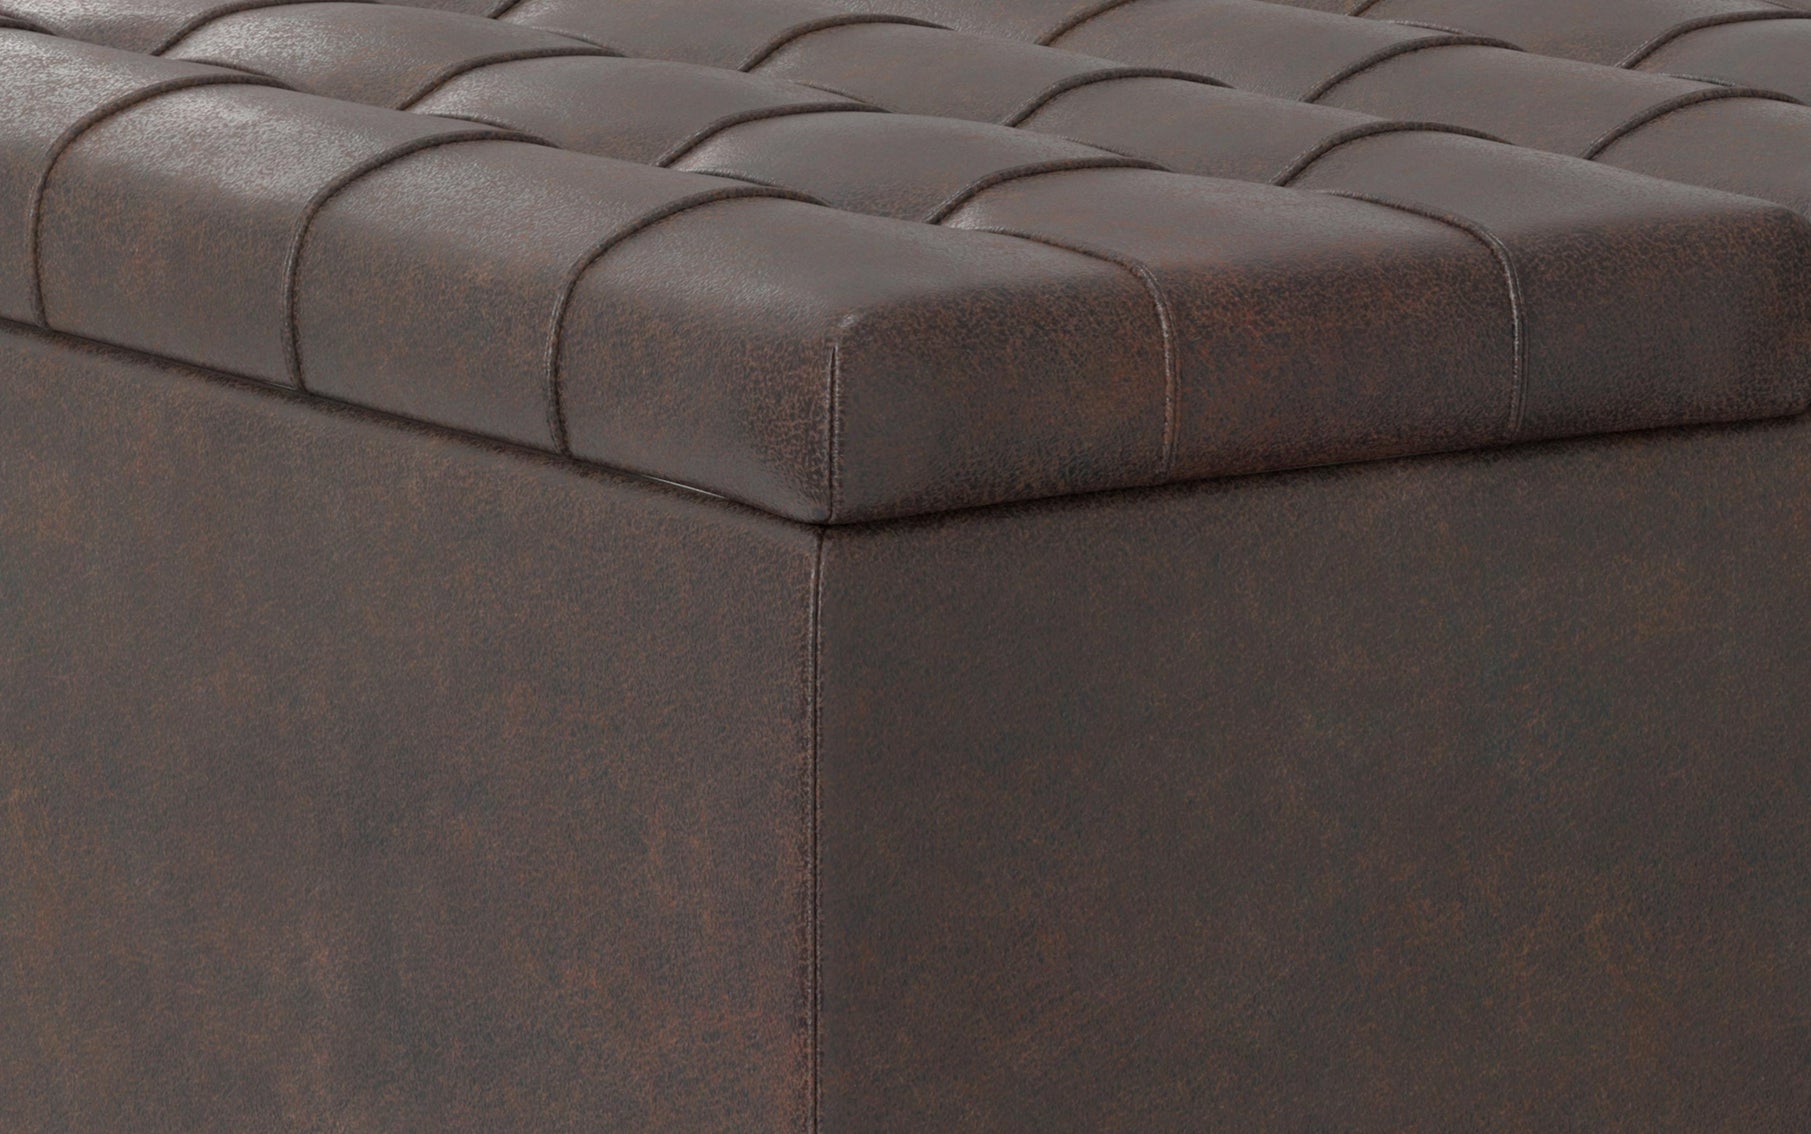 Distressed Brown Distressed Vegan Leather | Harrison Small Square Coffee Table Storage Ottoman in Distressed Vegan Leather